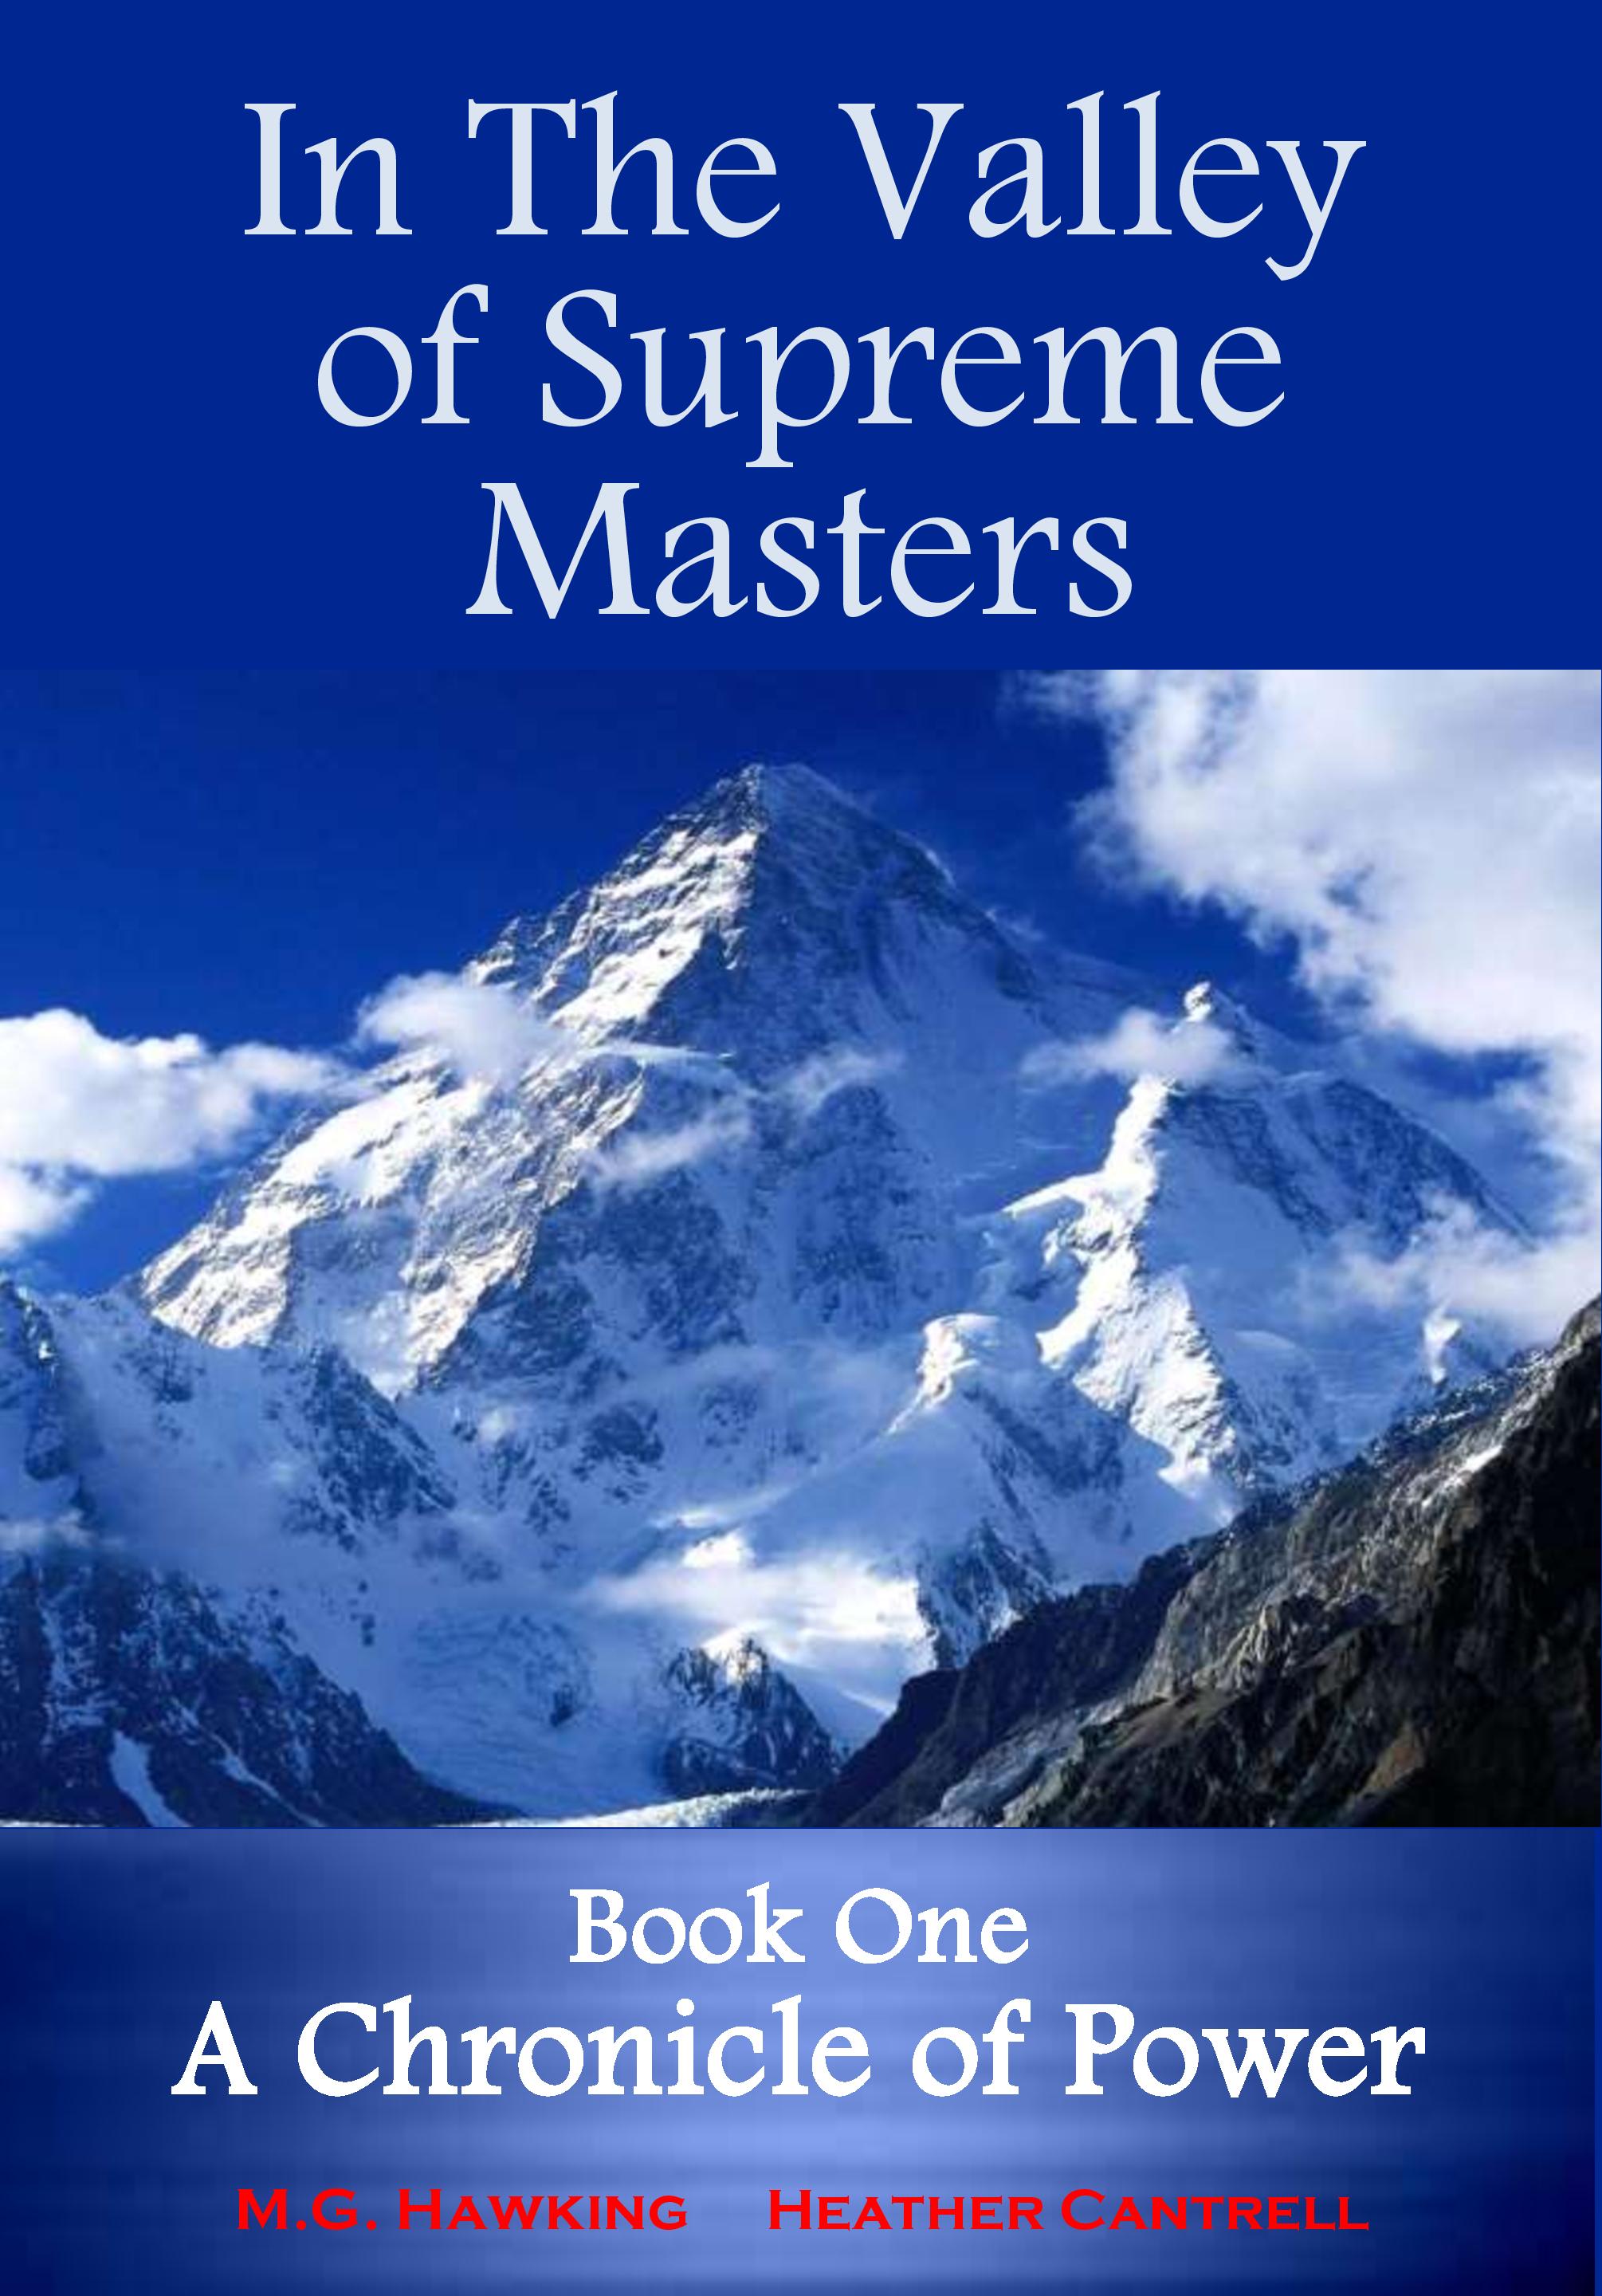 FREE: In The Valley of Supreme Masters, A Chronicle of Power by M.G. Hawking, Heather Cantrell, Jenna Wolfe Ph.D.